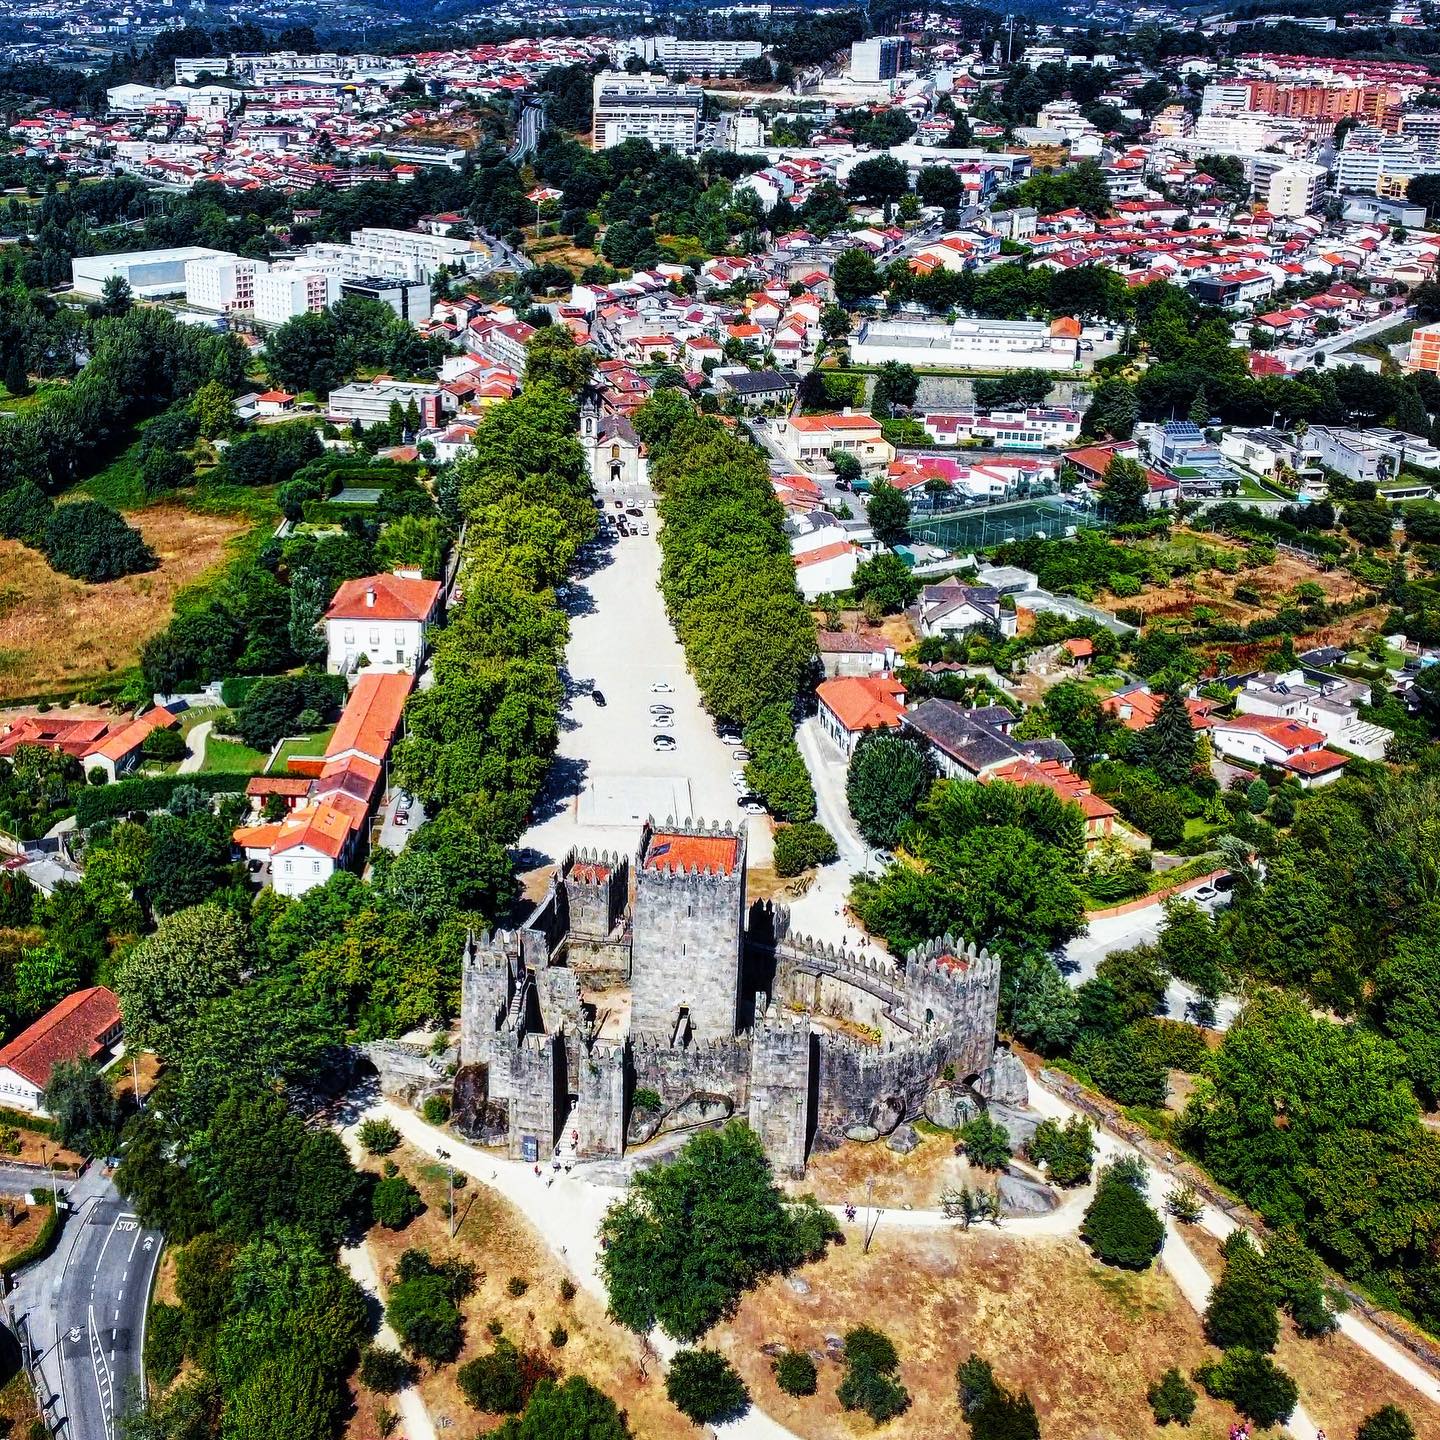 A view of Guimarães, Portugal